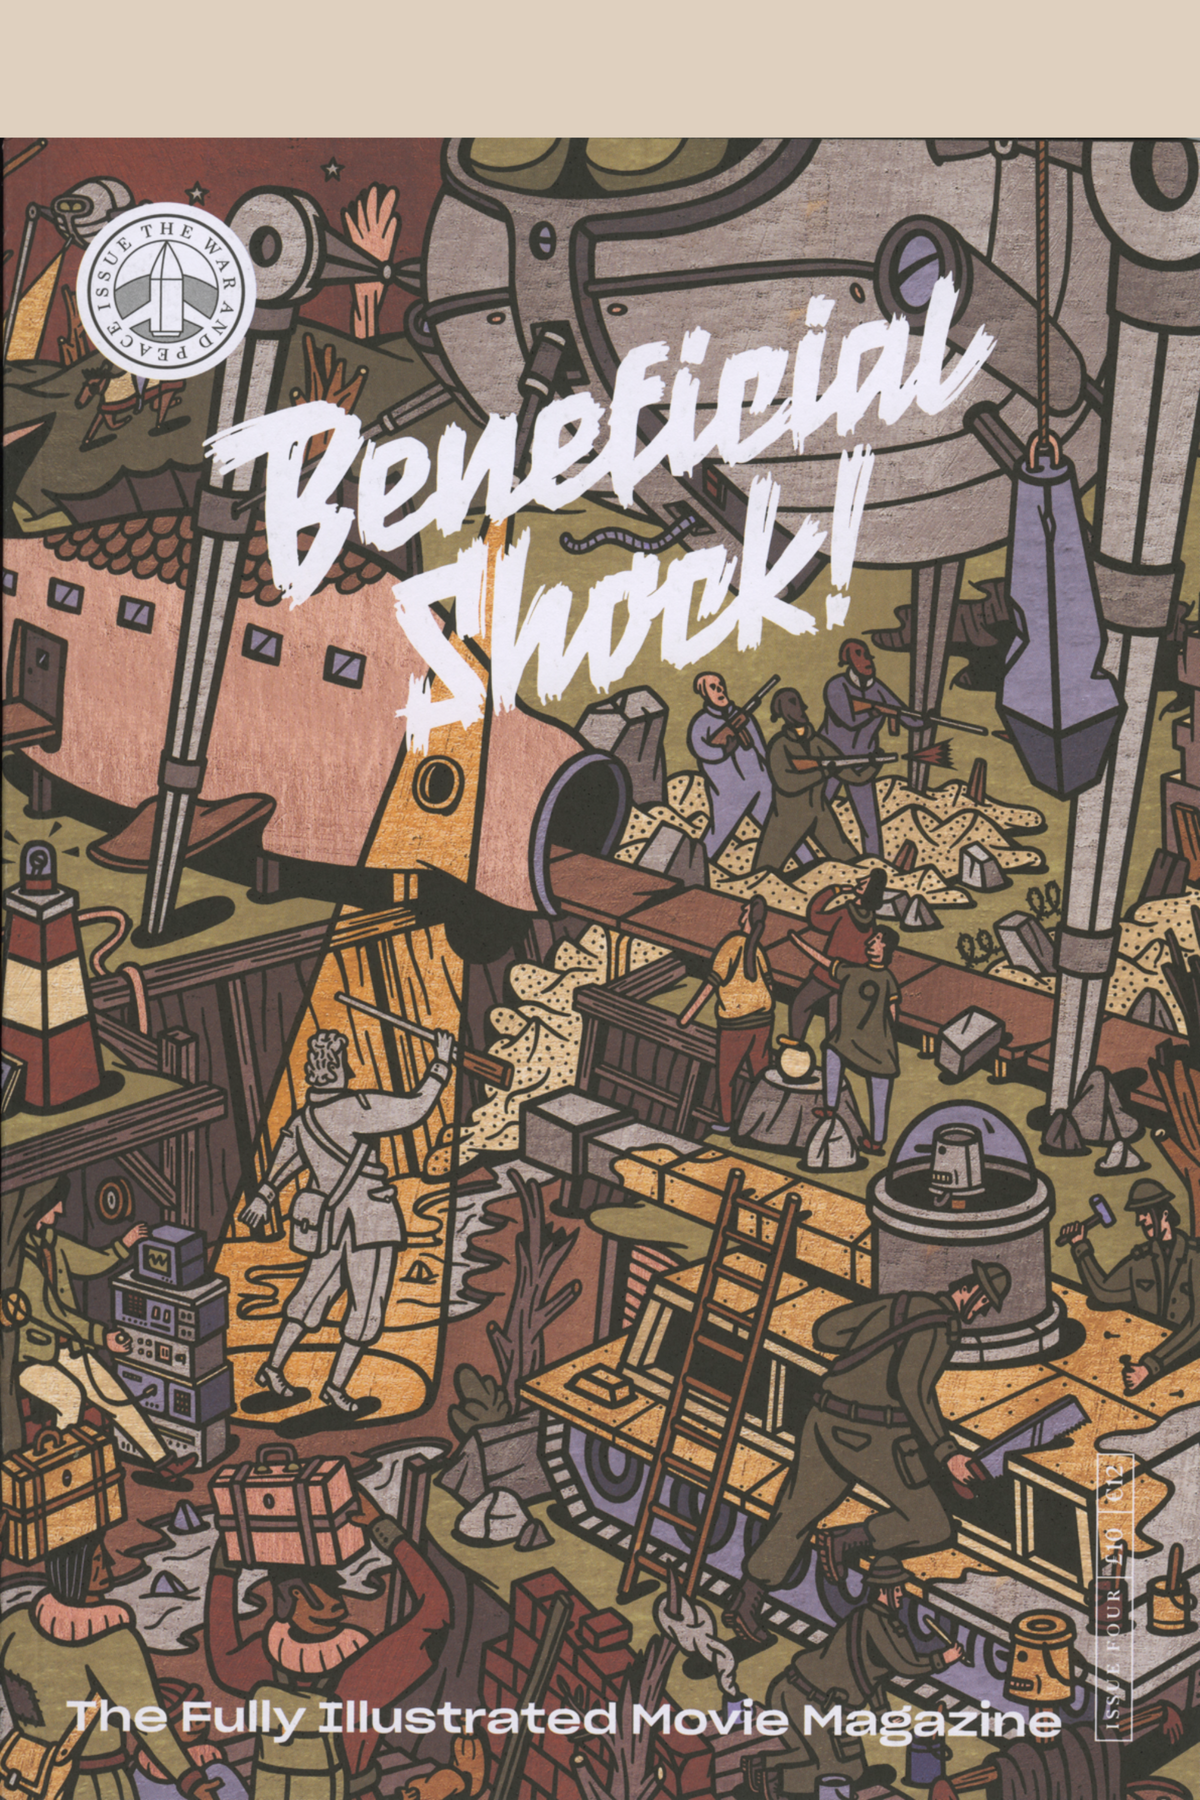 Beneficial Shock! Issue 4 : War &amp; Peace